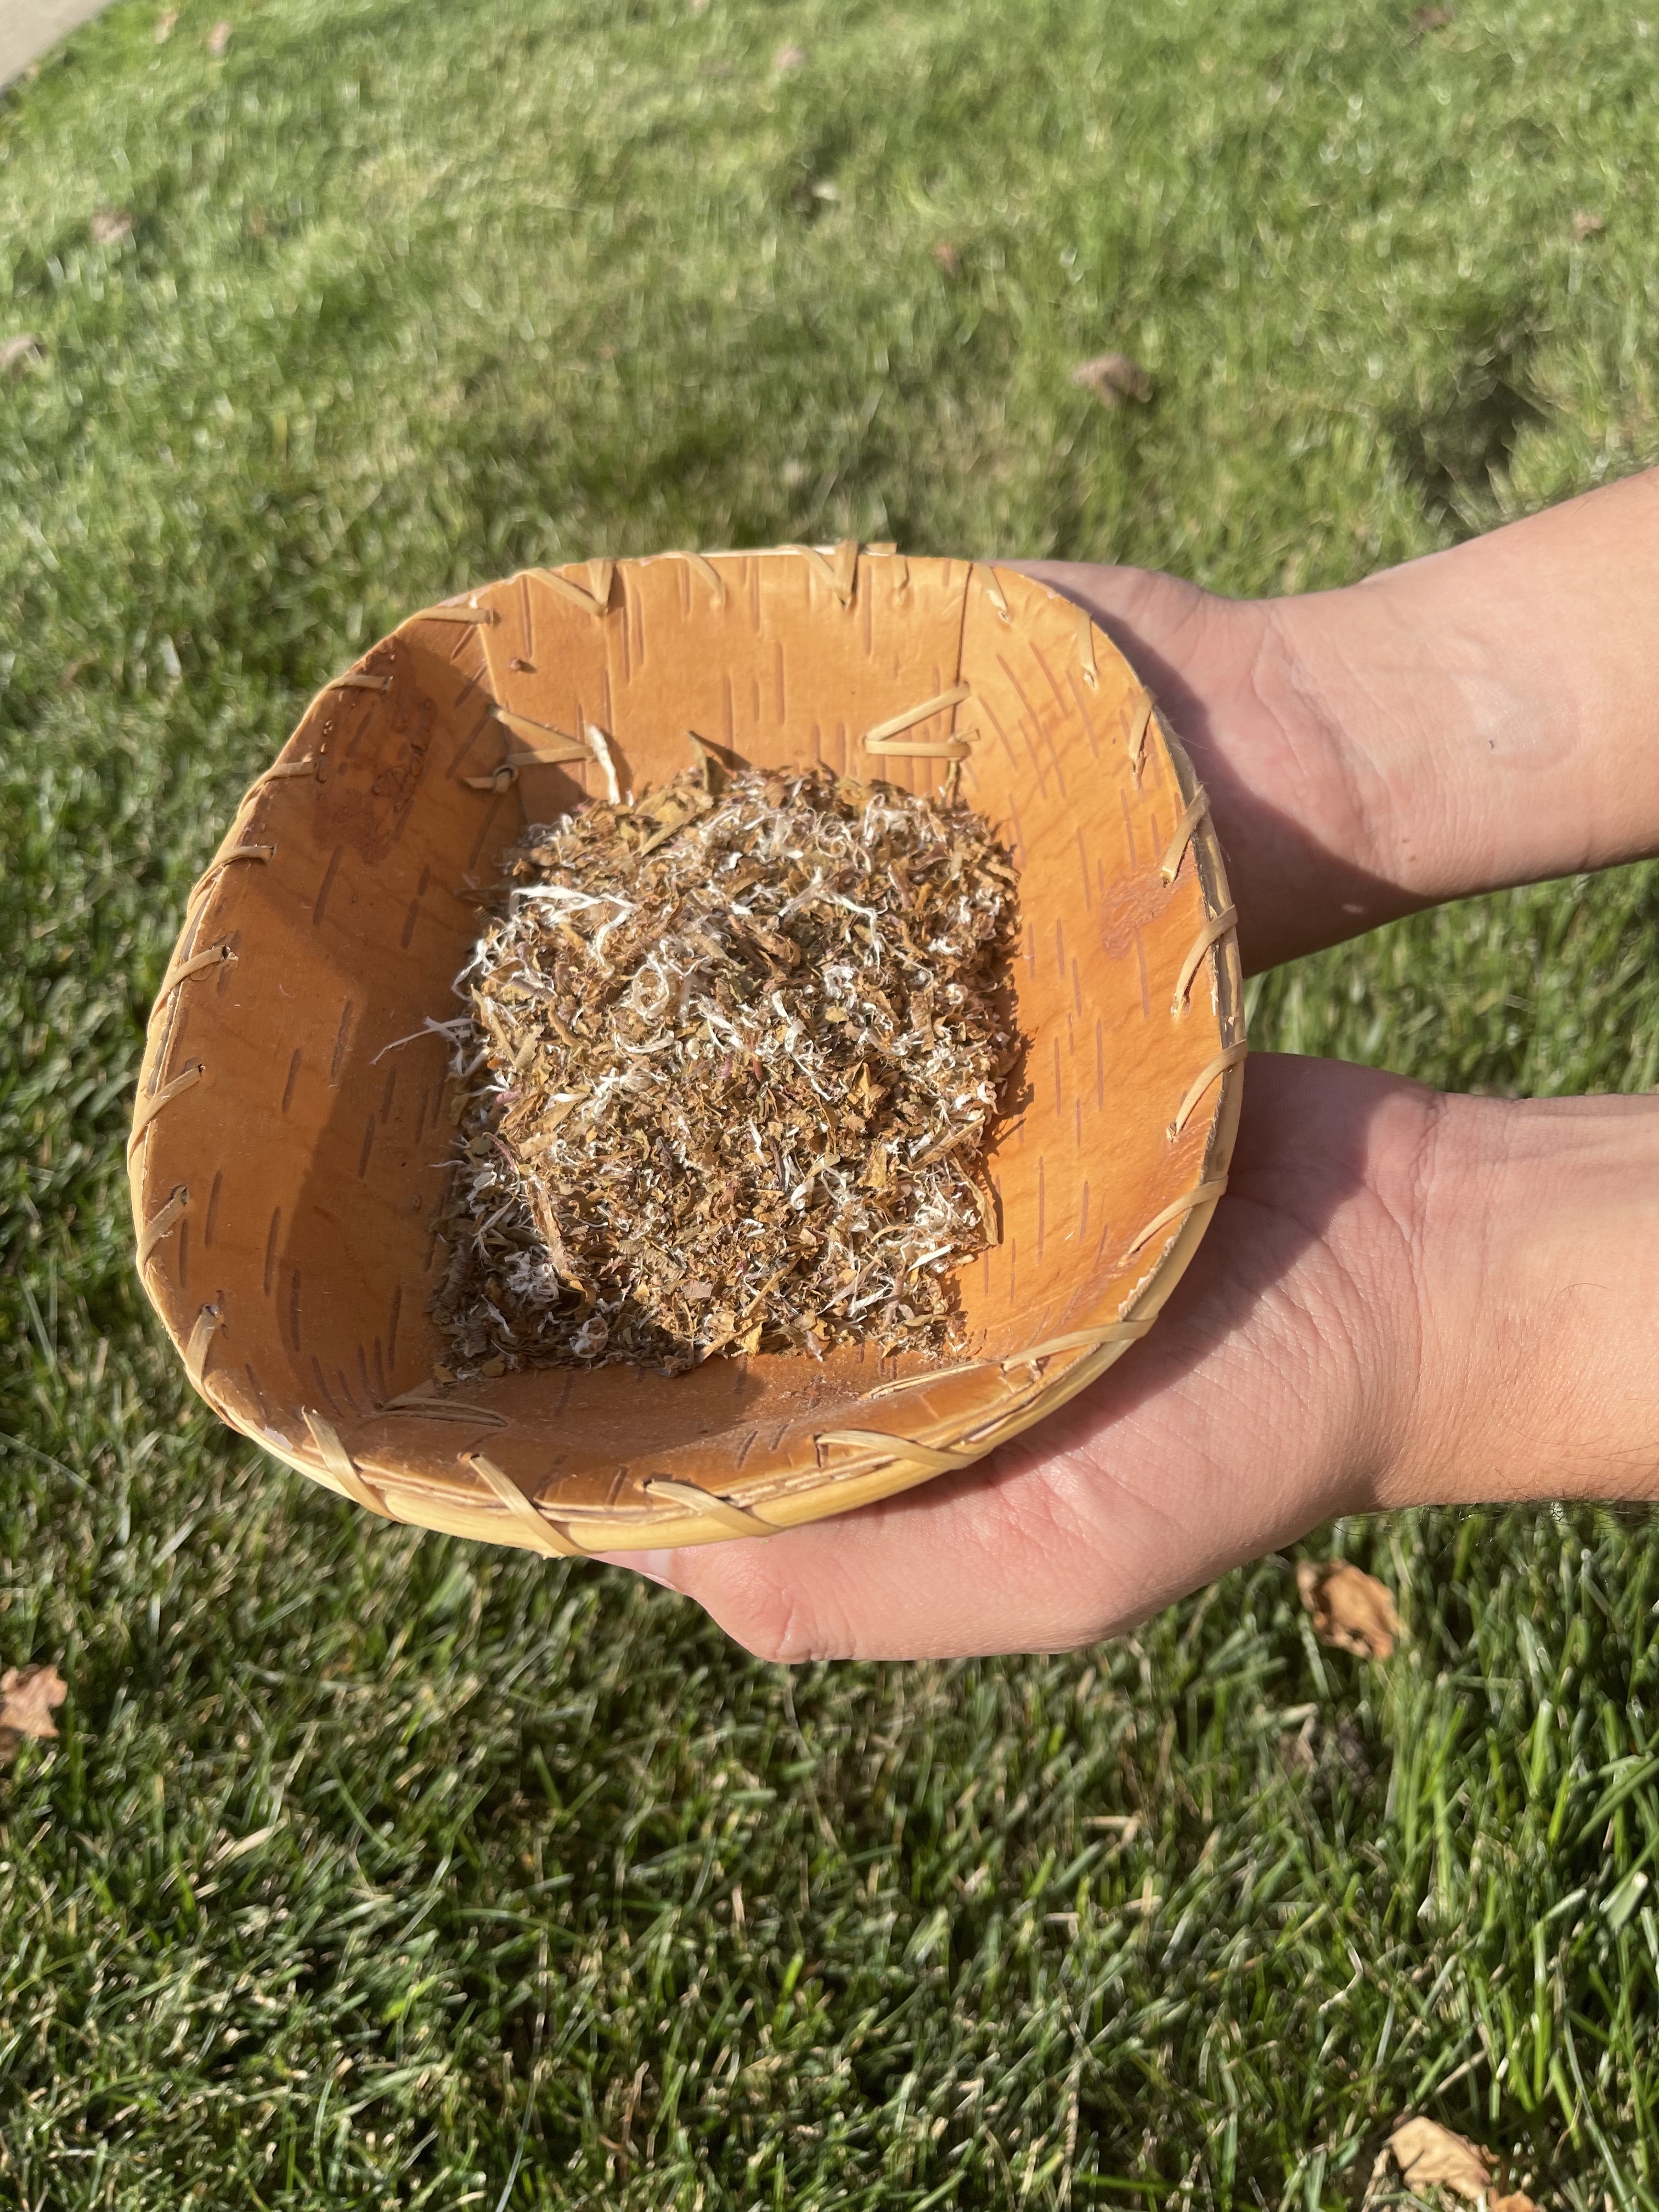 a bowl of traditional tobacco leaves